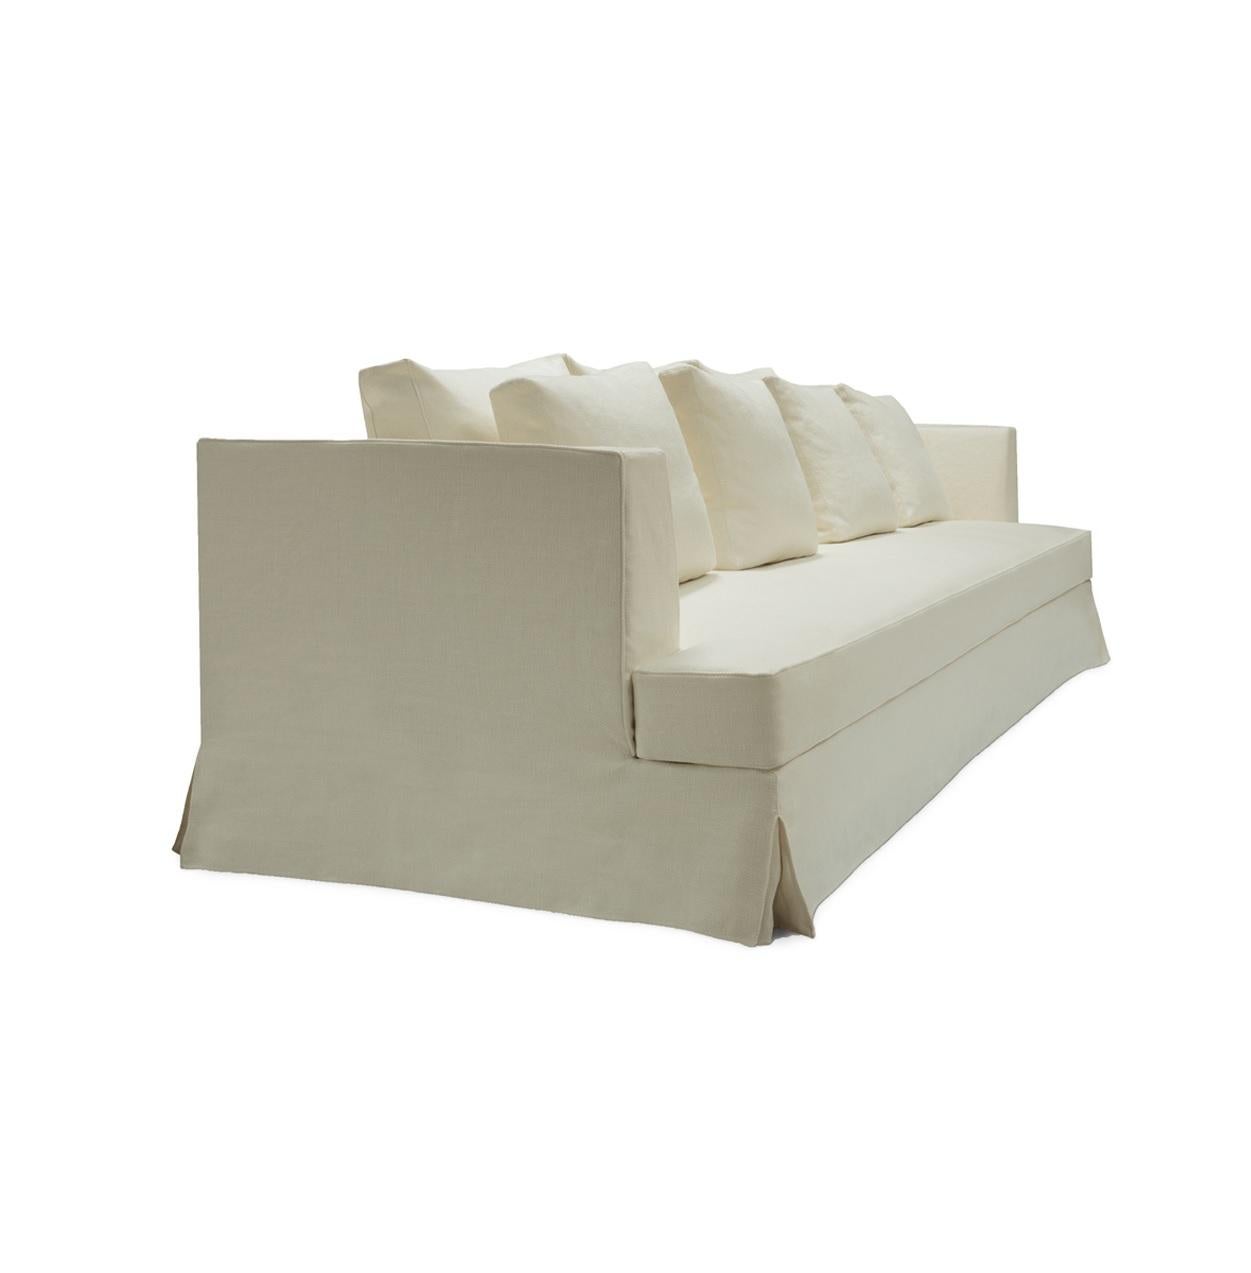 Meki sofa by LK Edition
Dimensions: 270 x 90 x H 70 cm
Materials: Structure in Wood and Linen seats and cushions. 
4 back cushions and 4 front cushions. 

It is with the sense of detail and requirement, this research of the exception by the